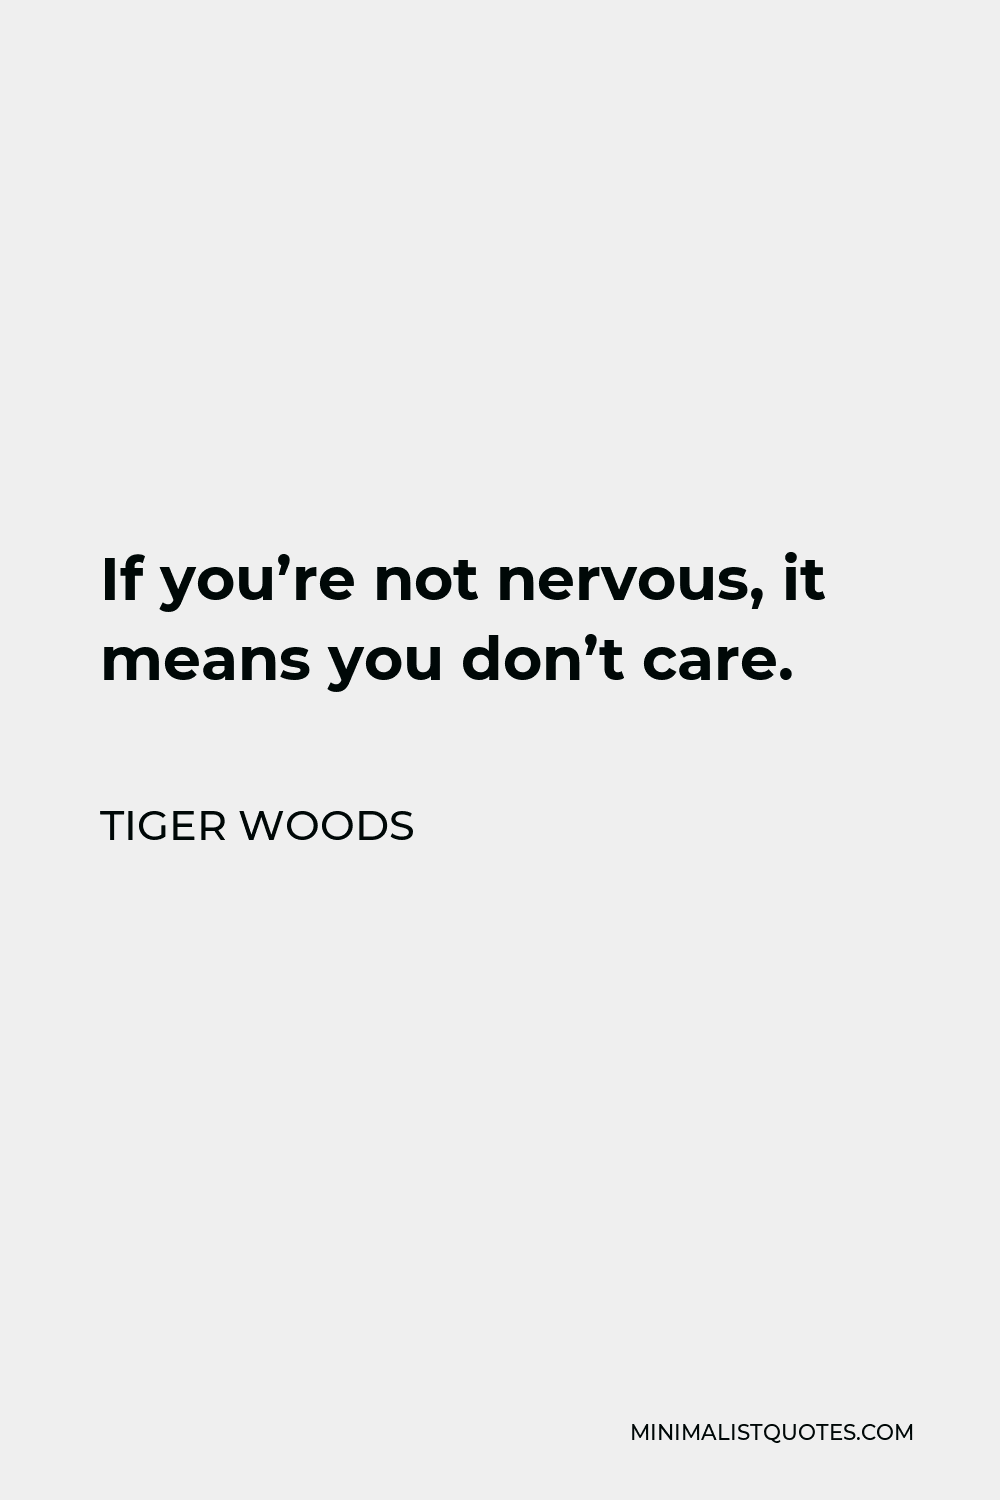 Tiger Woods Quote - If you’re not nervous, it means you don’t care.